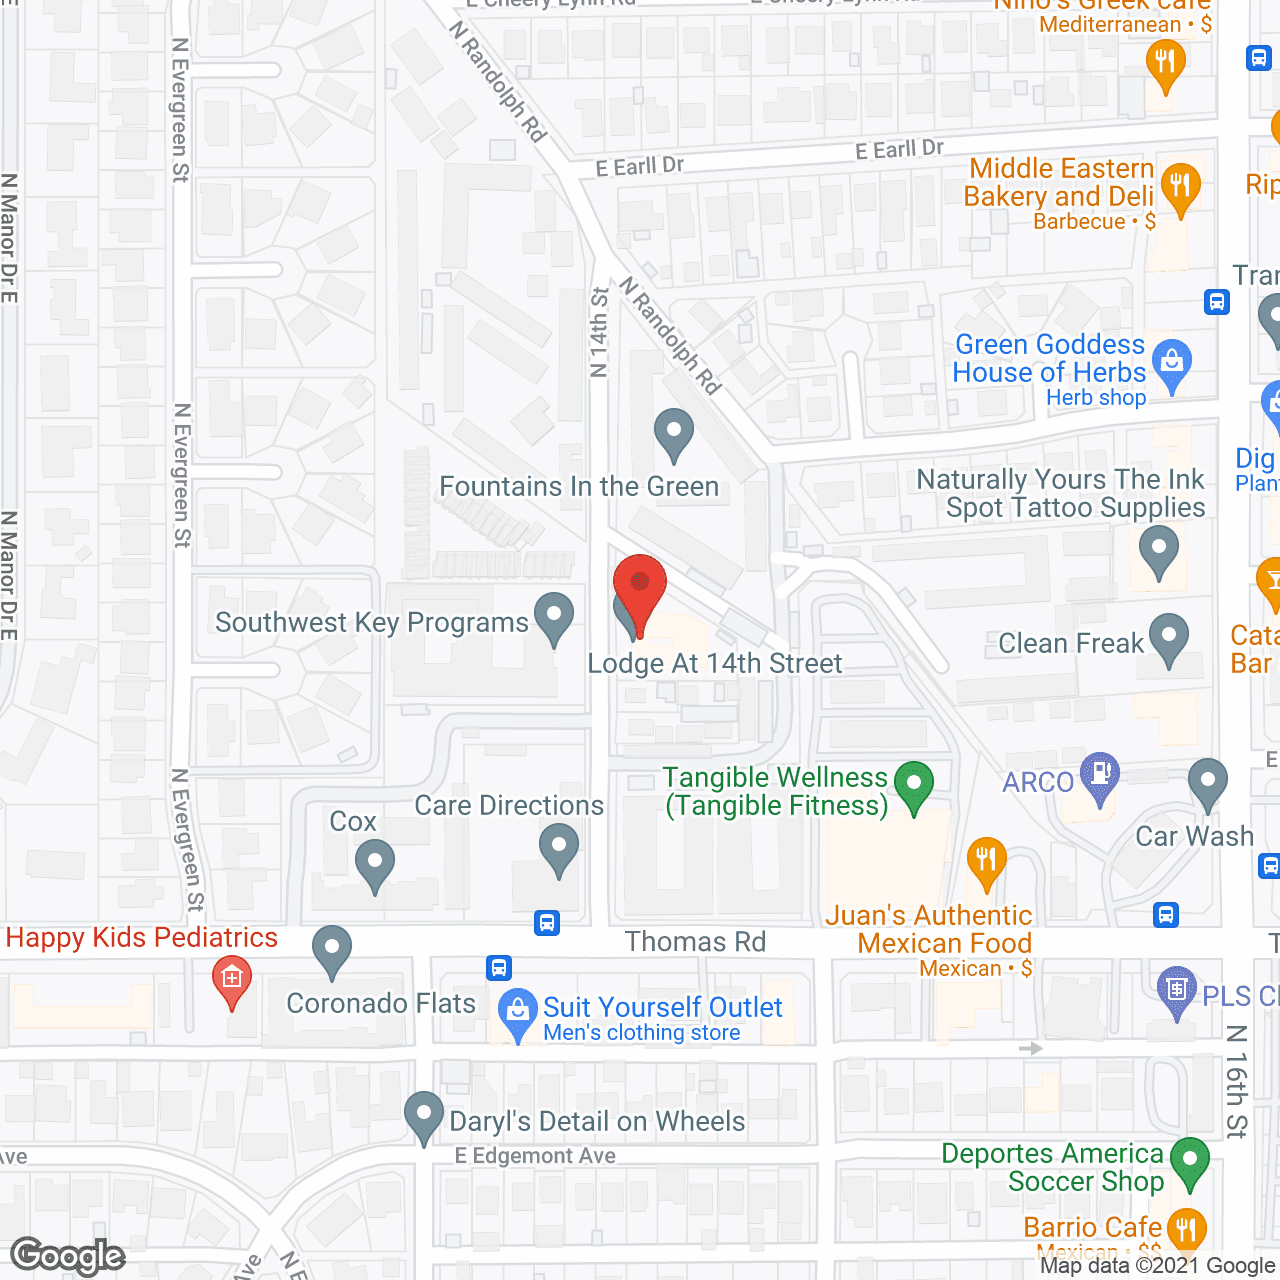 The Lodge at 14th Street in google map